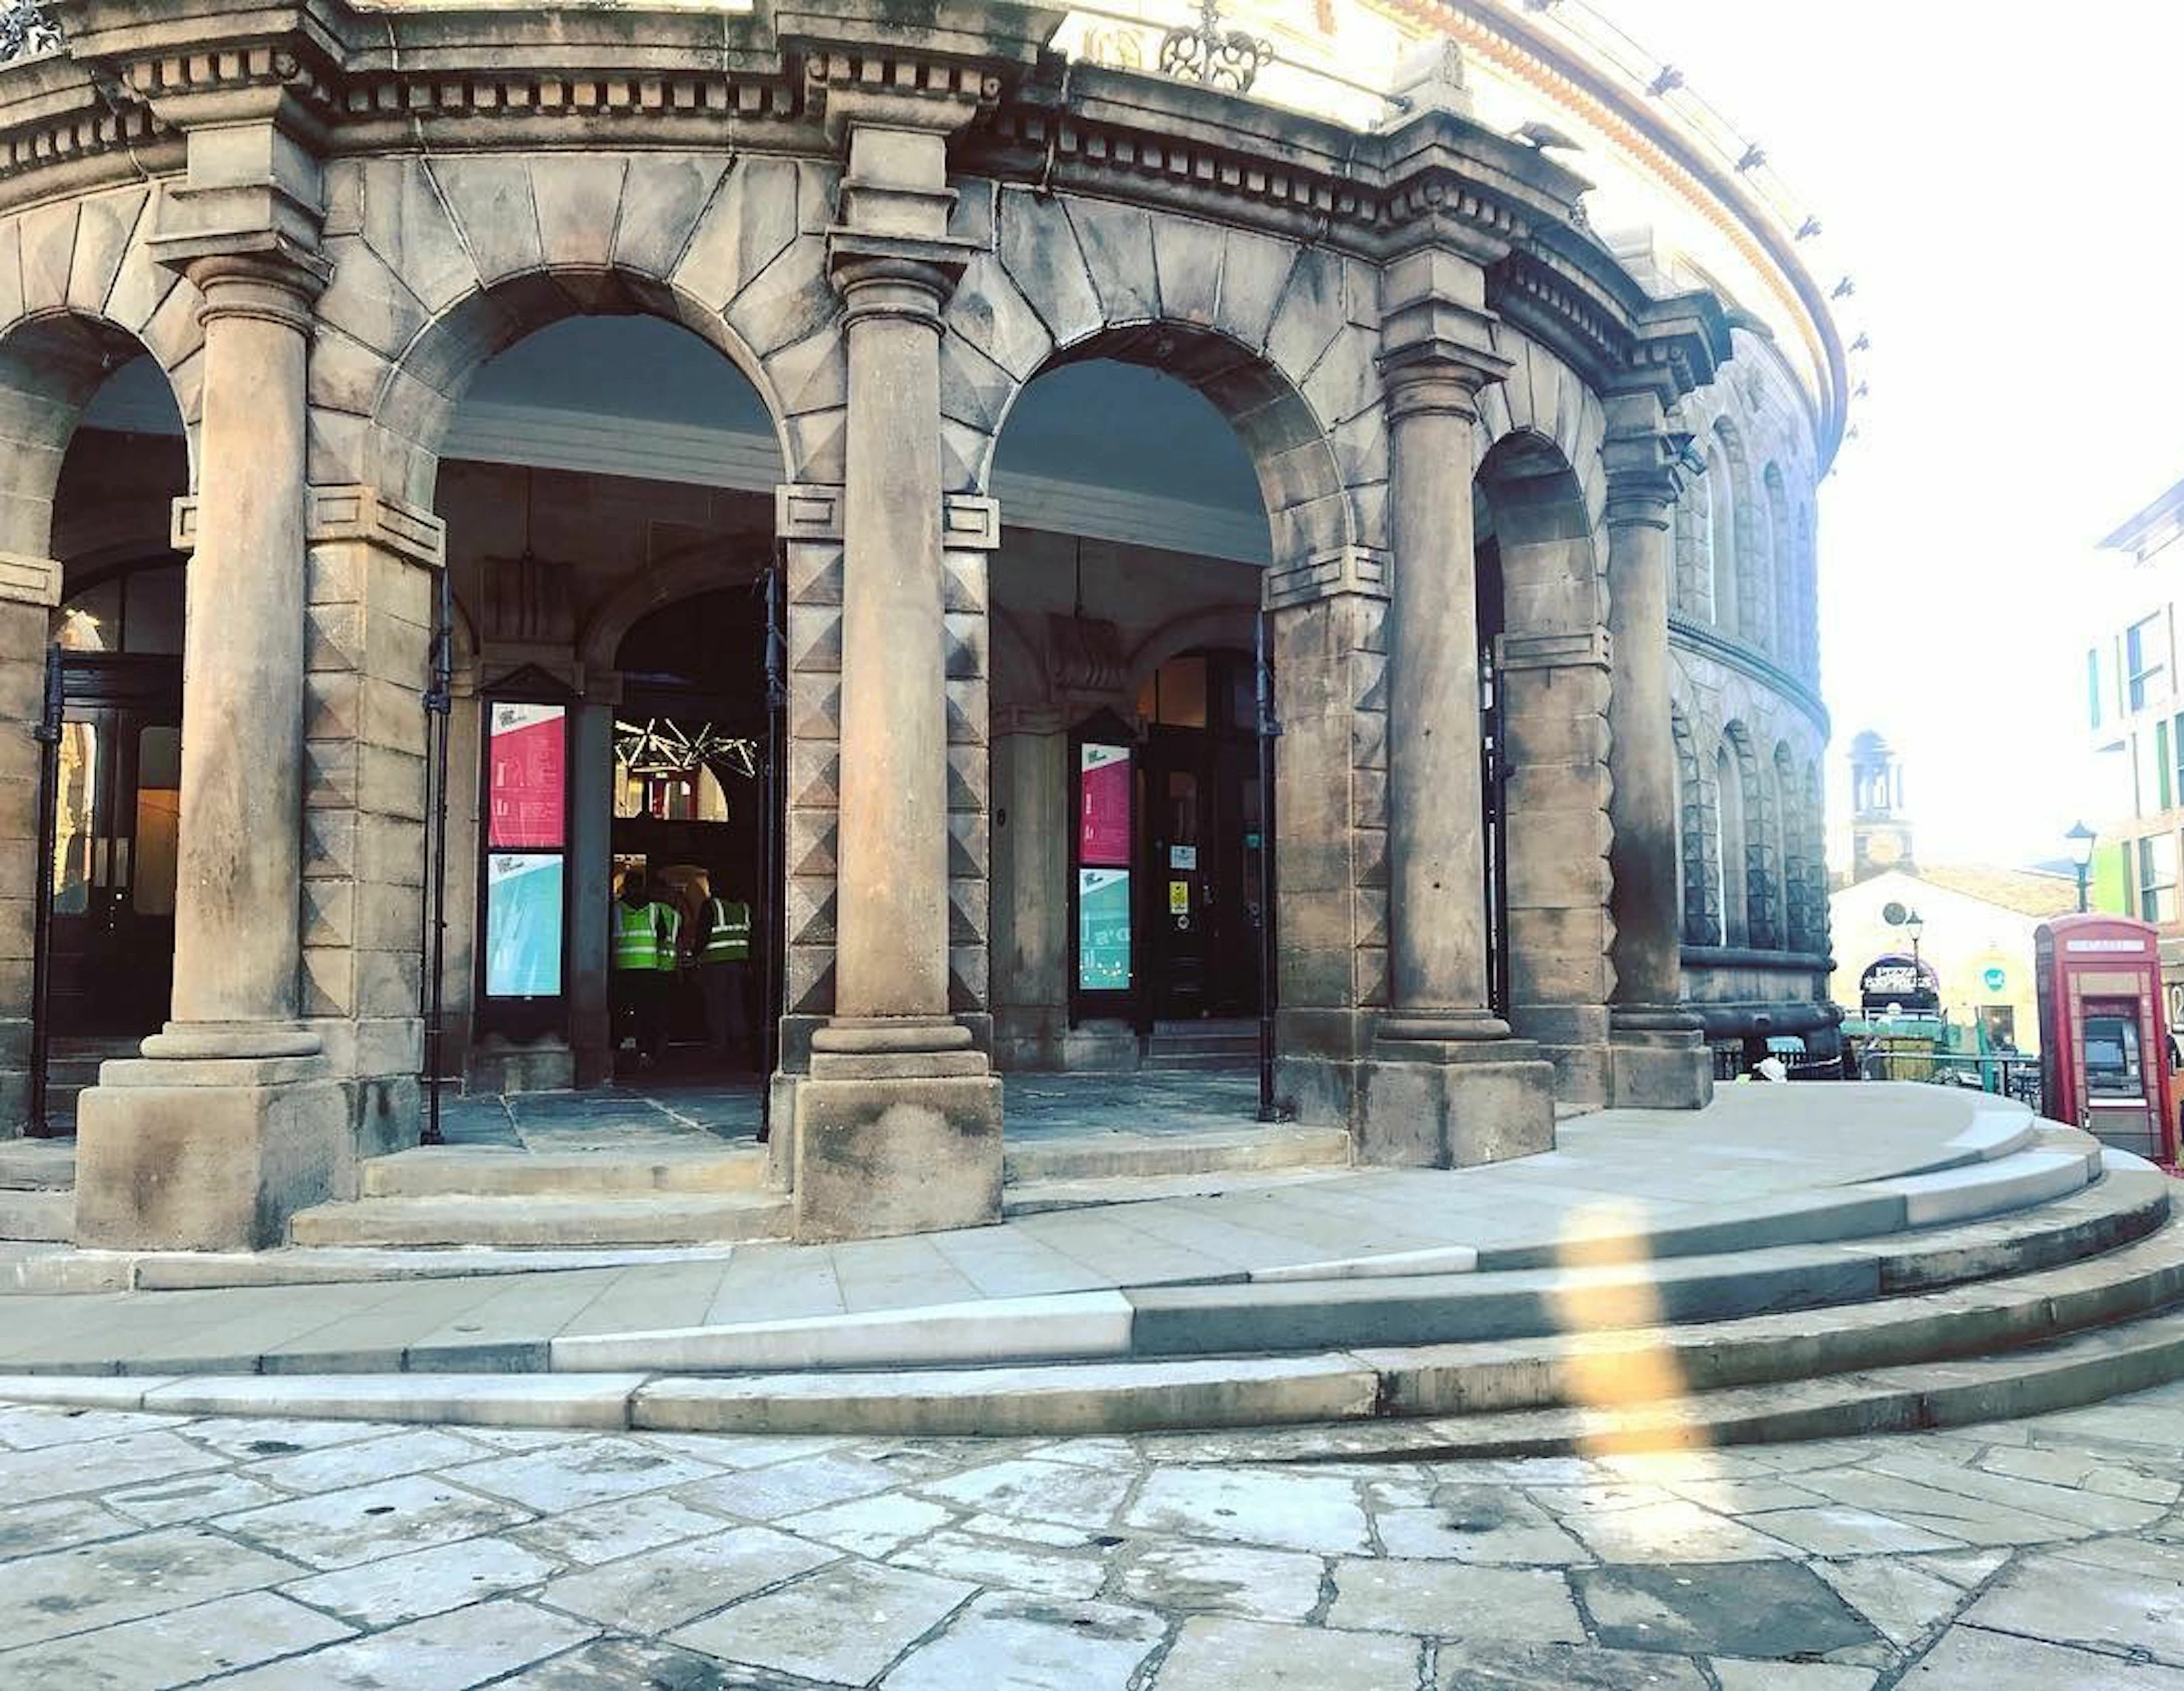 Property group ramps up accessibility at Leeds corn exchange 